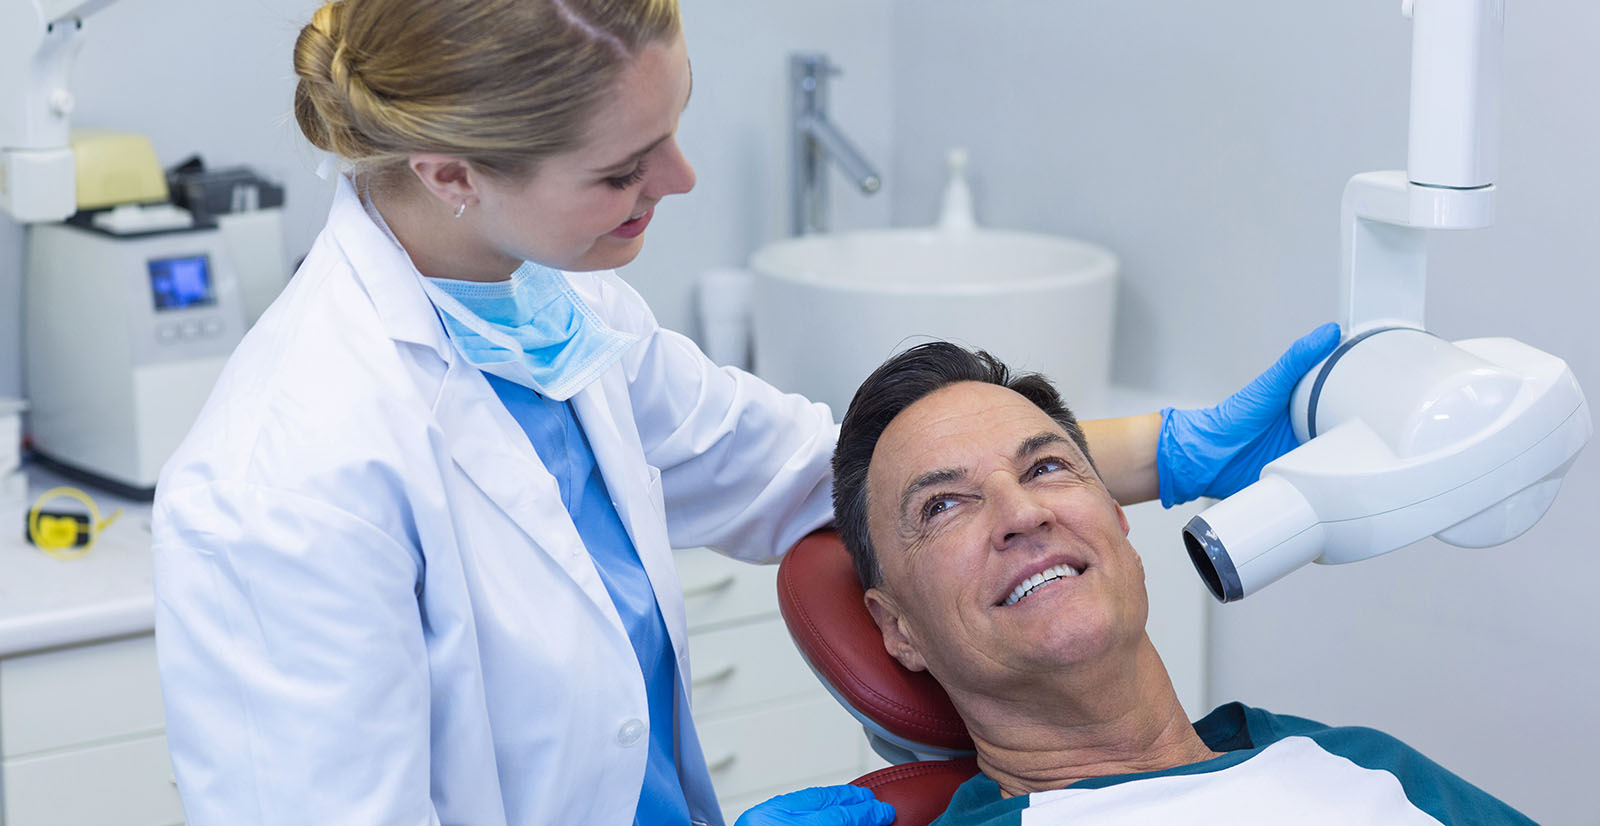 What To Expect at Your 6 Month Dental Appointment